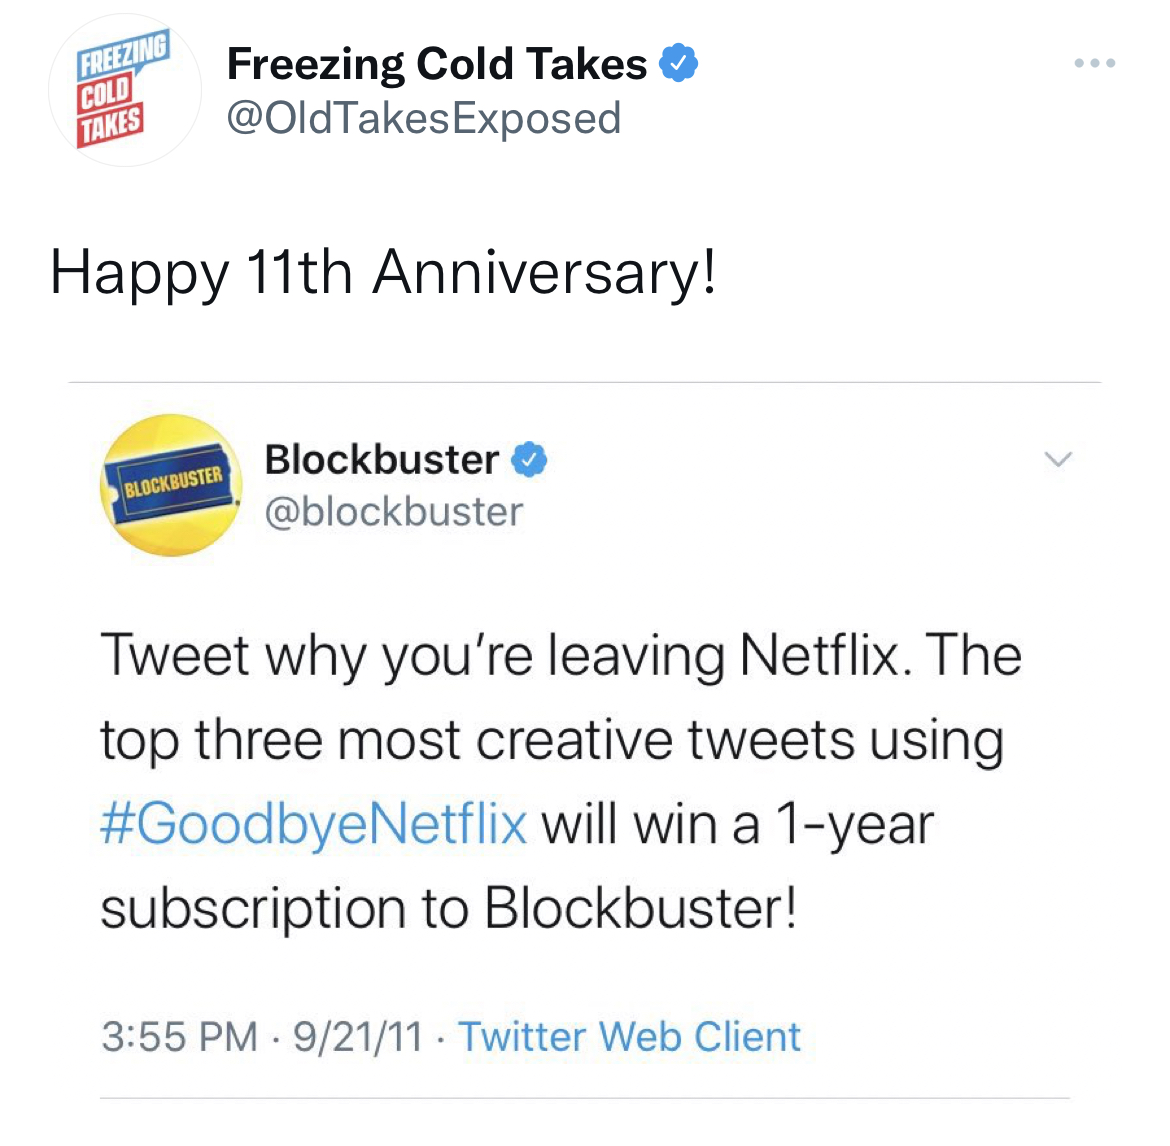 funny quick wit tweets - r sadcringe - Freezing Cold Takes Freezing Cold Takes Exposed Happy 11th Anniversary! Blockbuster Blockbuster Tweet why you're leaving Netflix. The top three most creative tweets using will win a 1year subscription to Blockbuster!